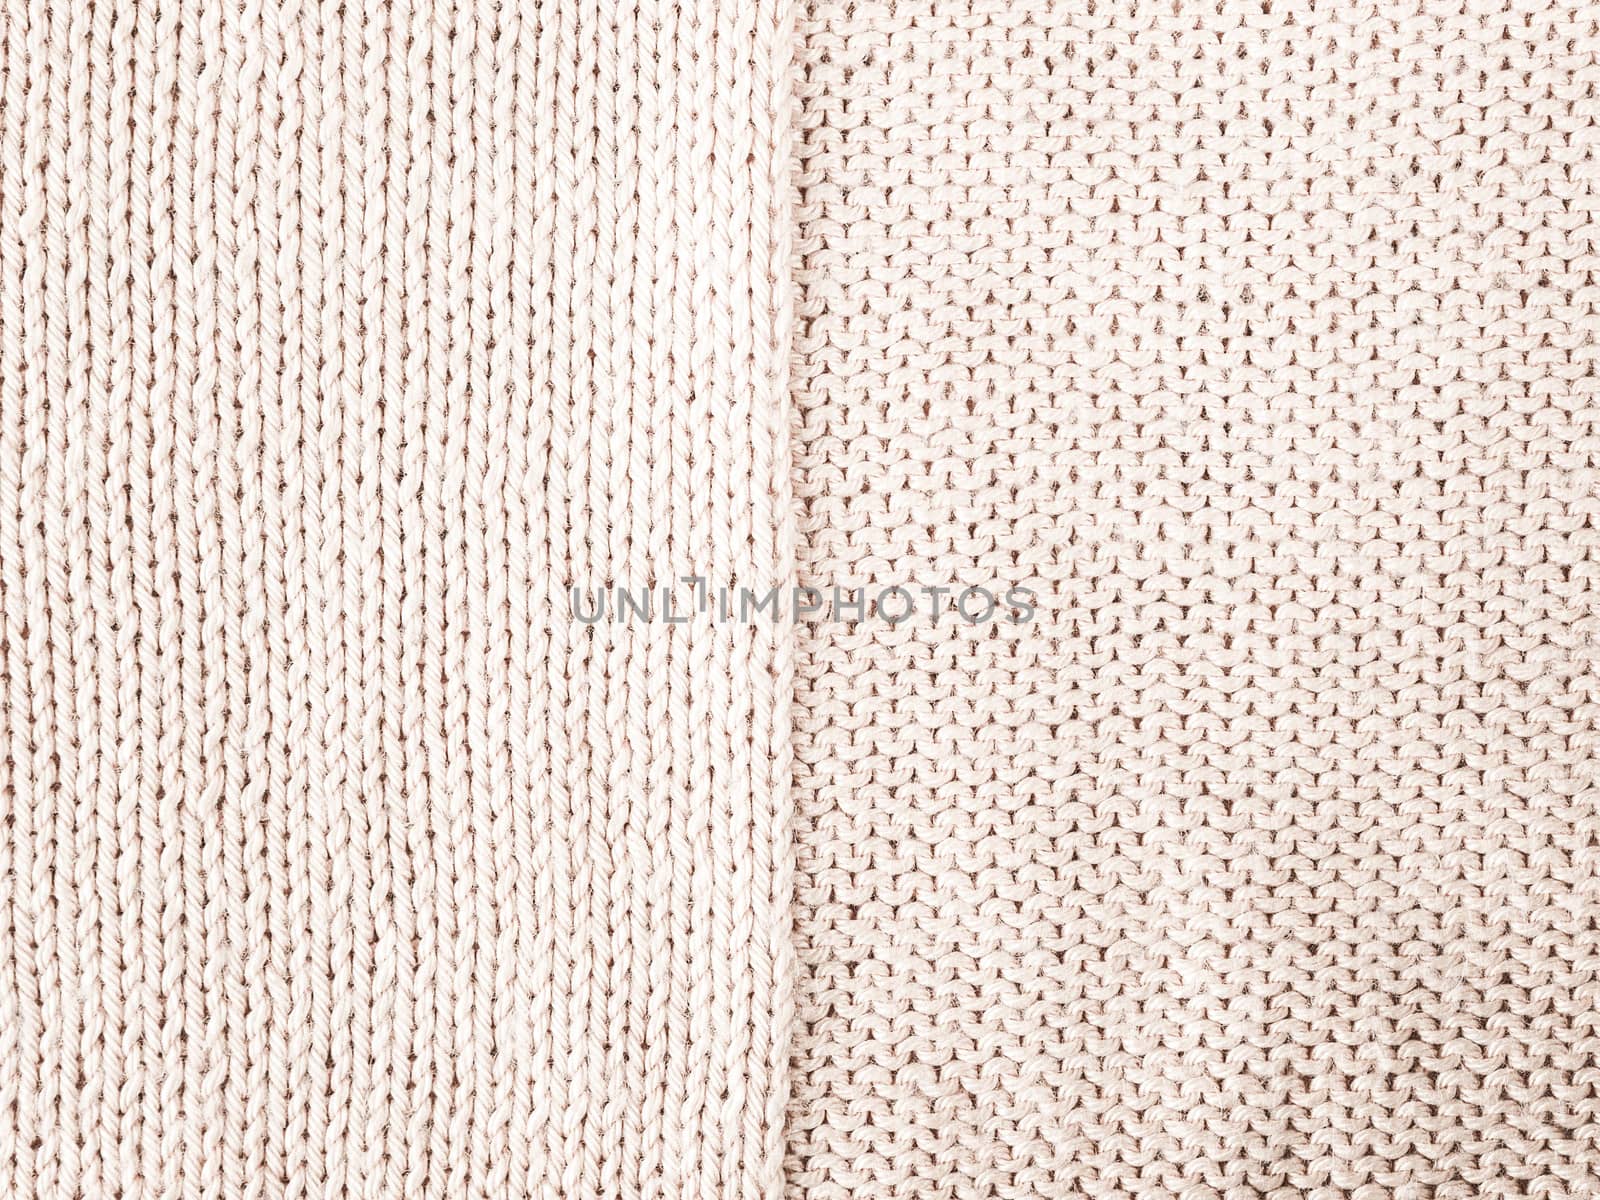 light Coloured knitted Jersey as textile background